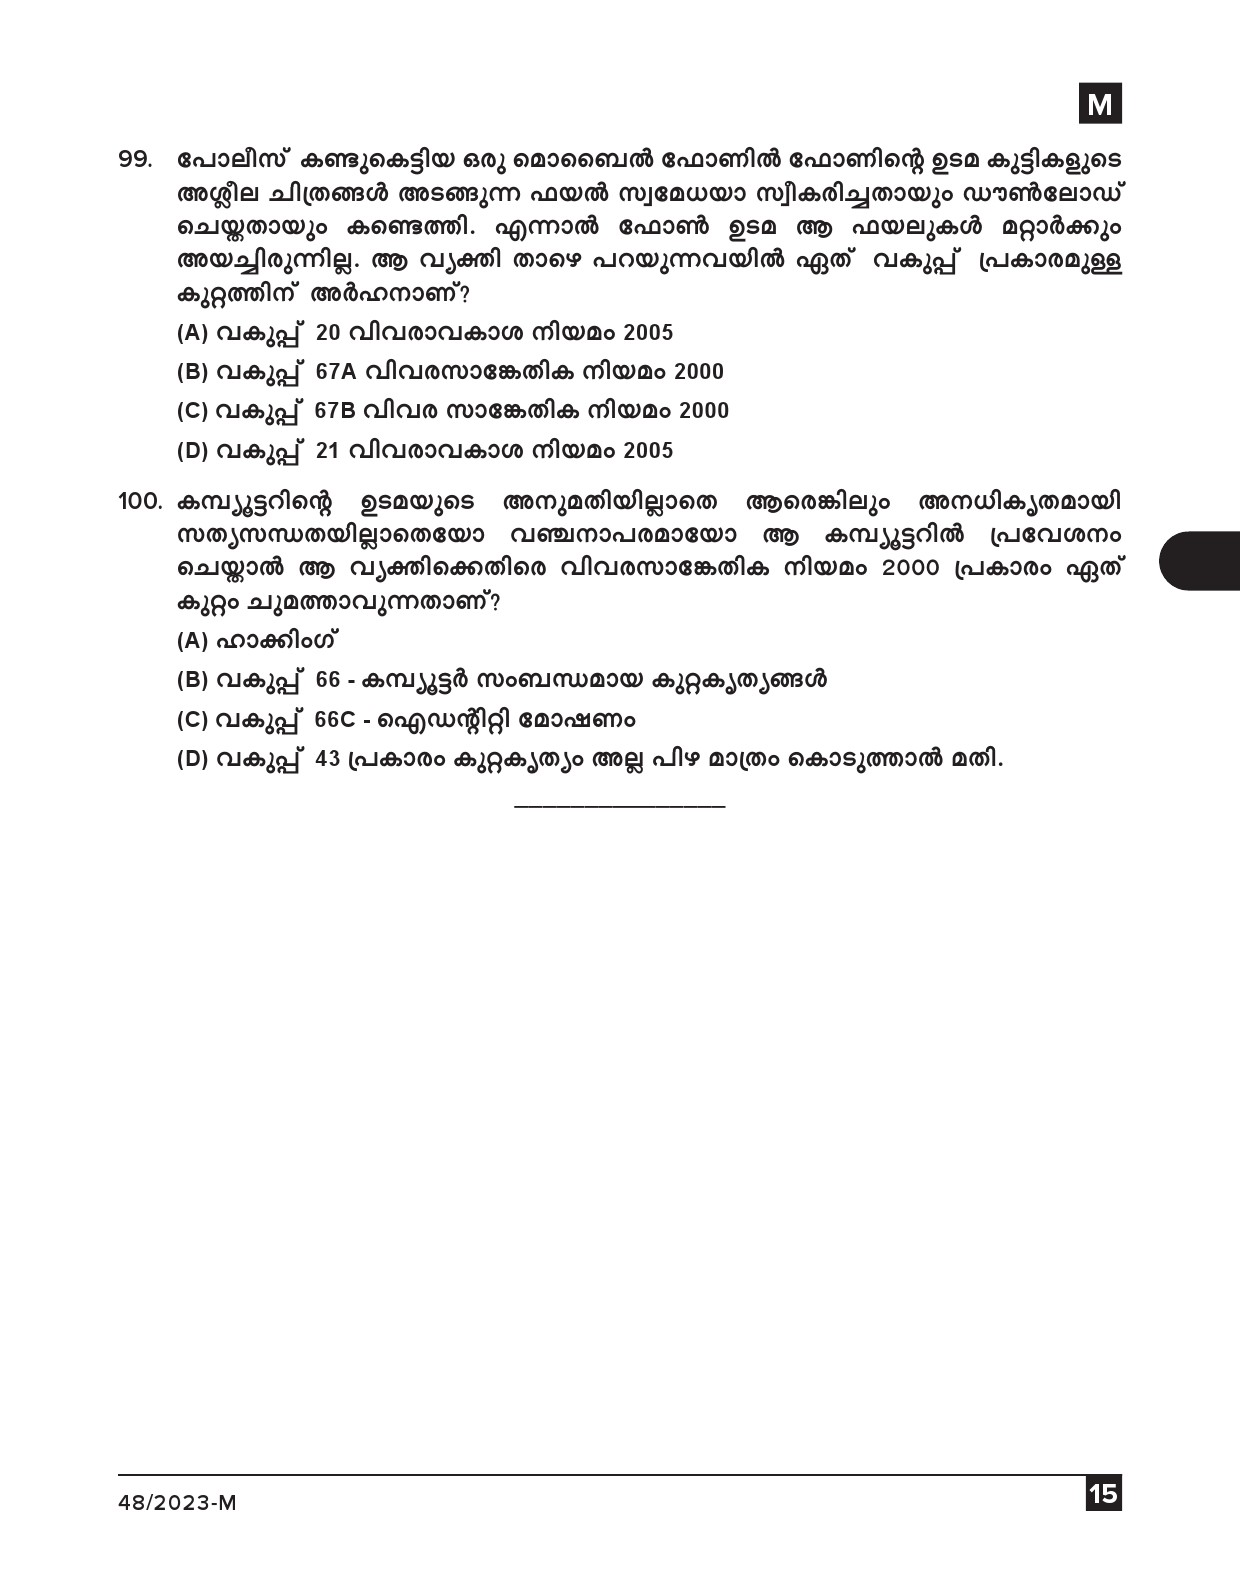 KPSC Fire and Rescue Officer Malayalam Exam 2023 Code 0482023 M 14